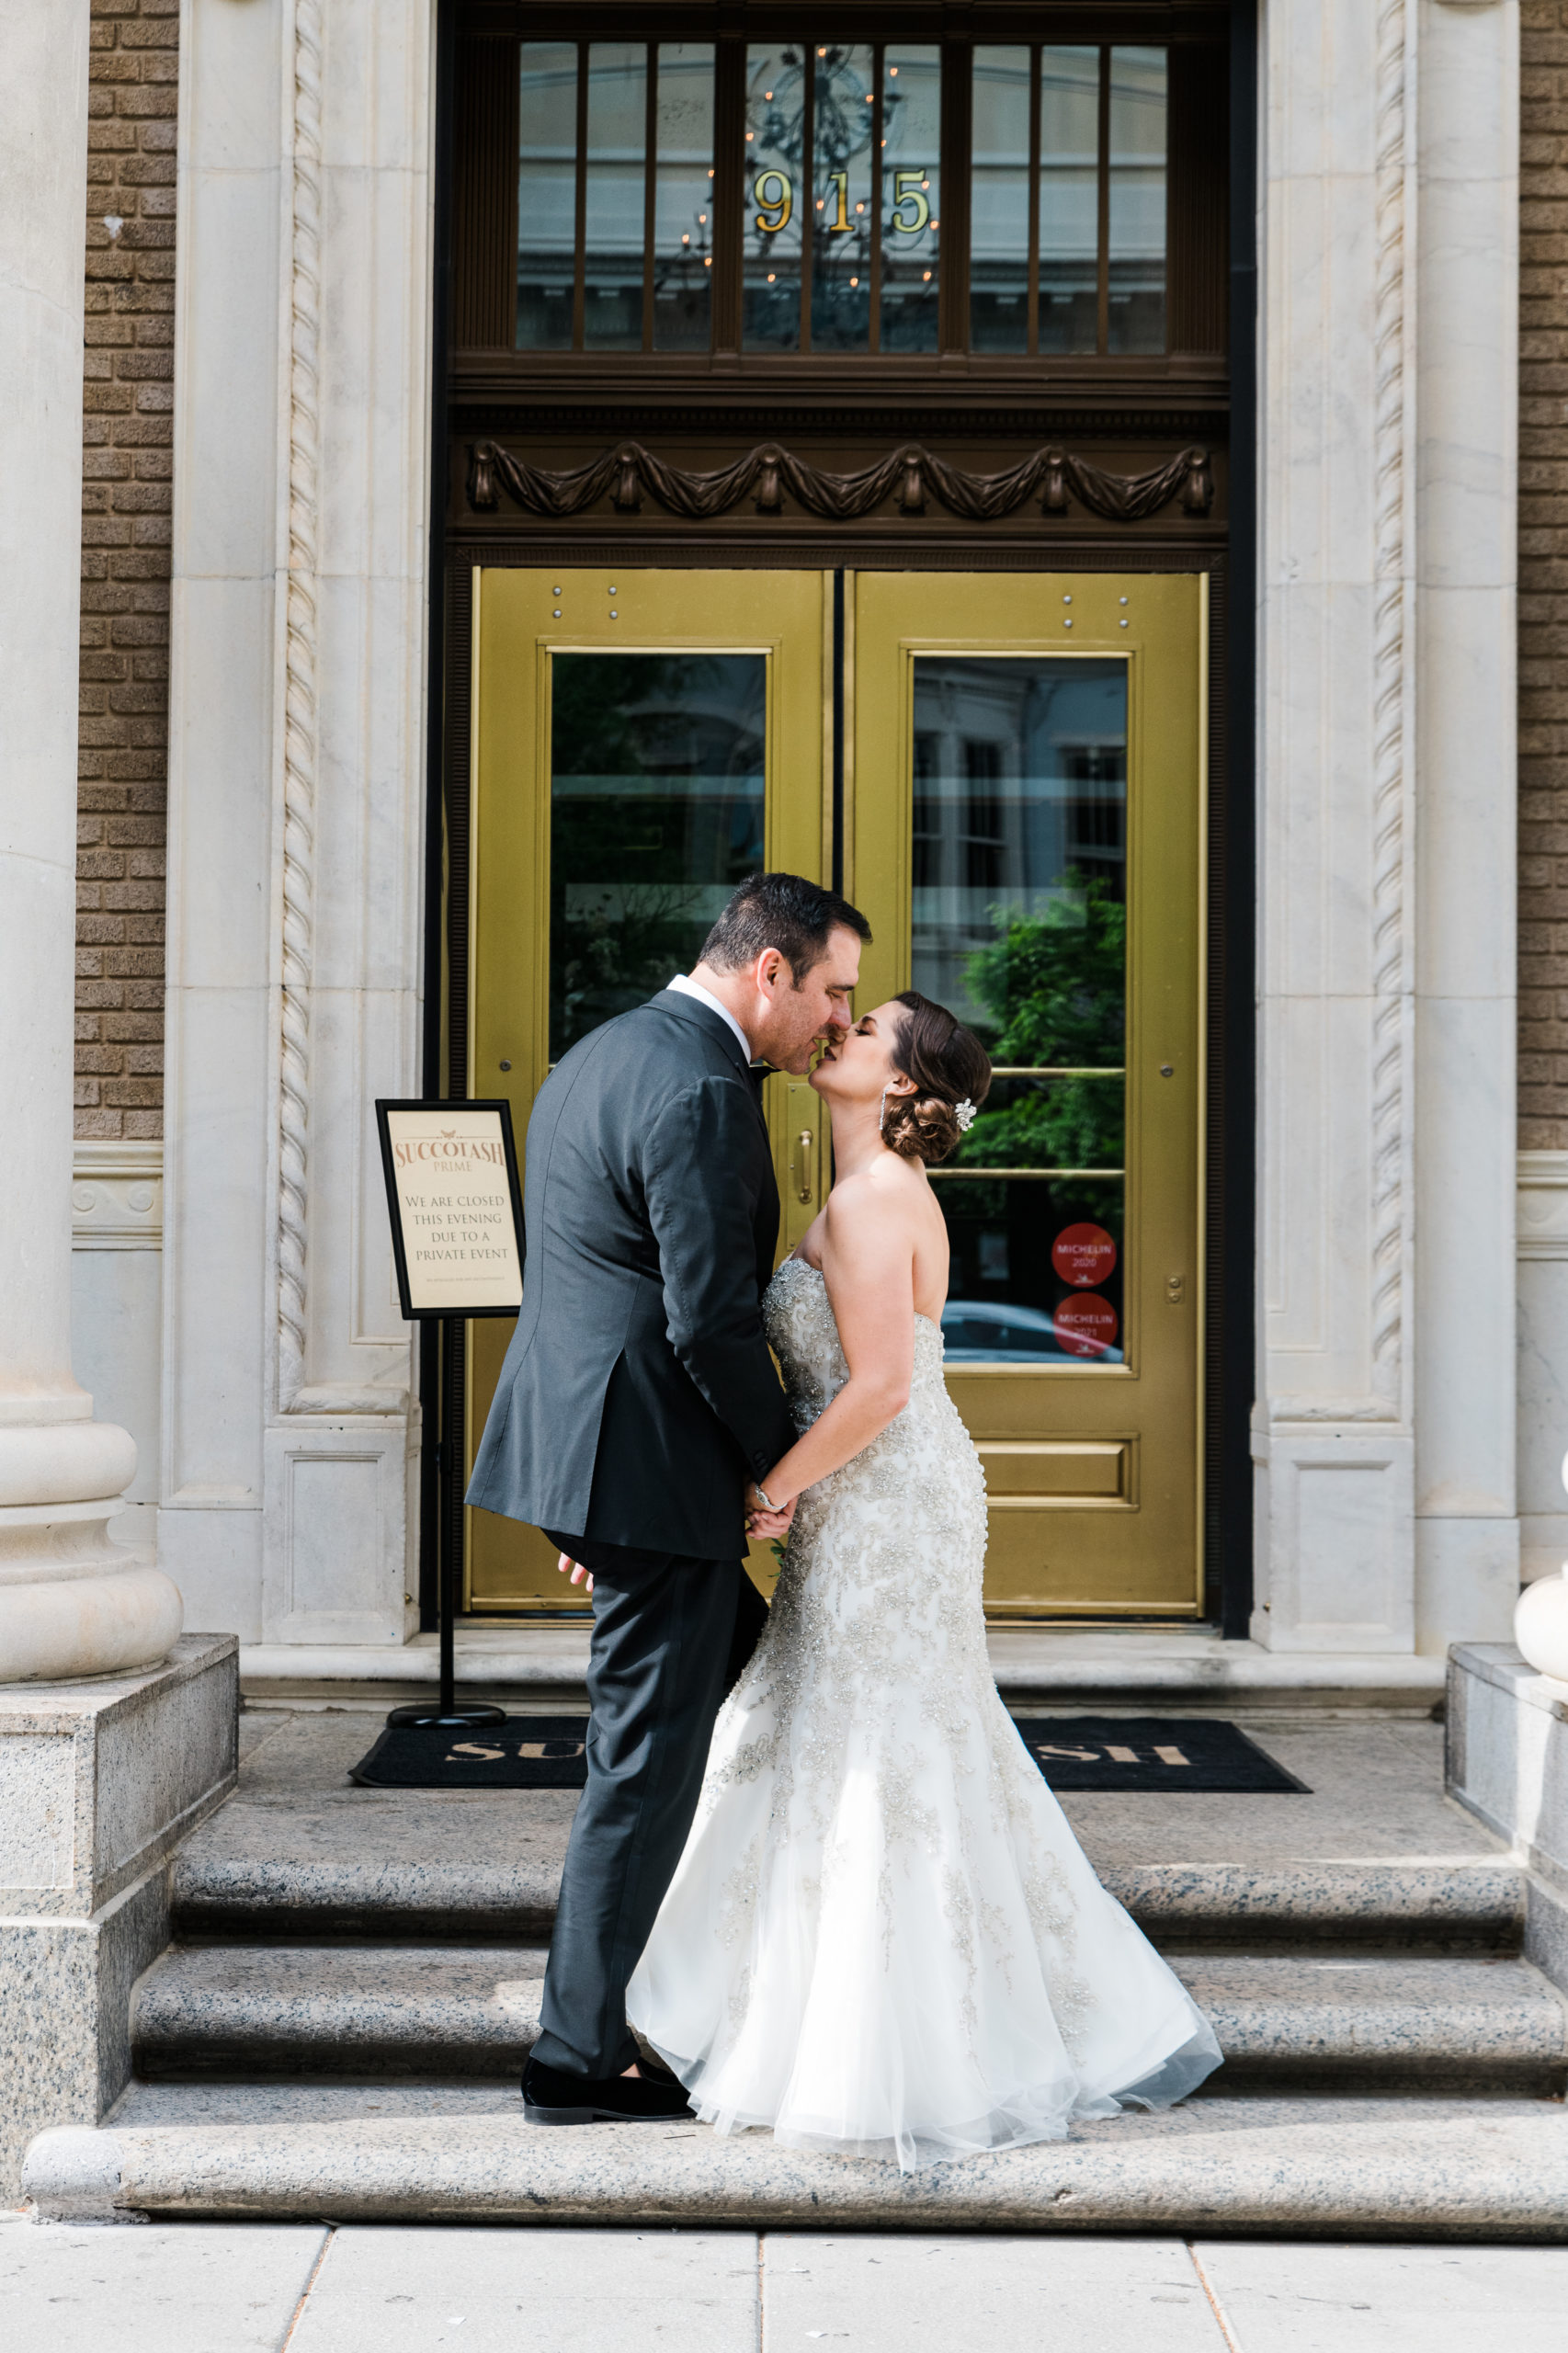 The bride and groom kissing on the steps in front of Succotash Prime restaurant in Washington DC